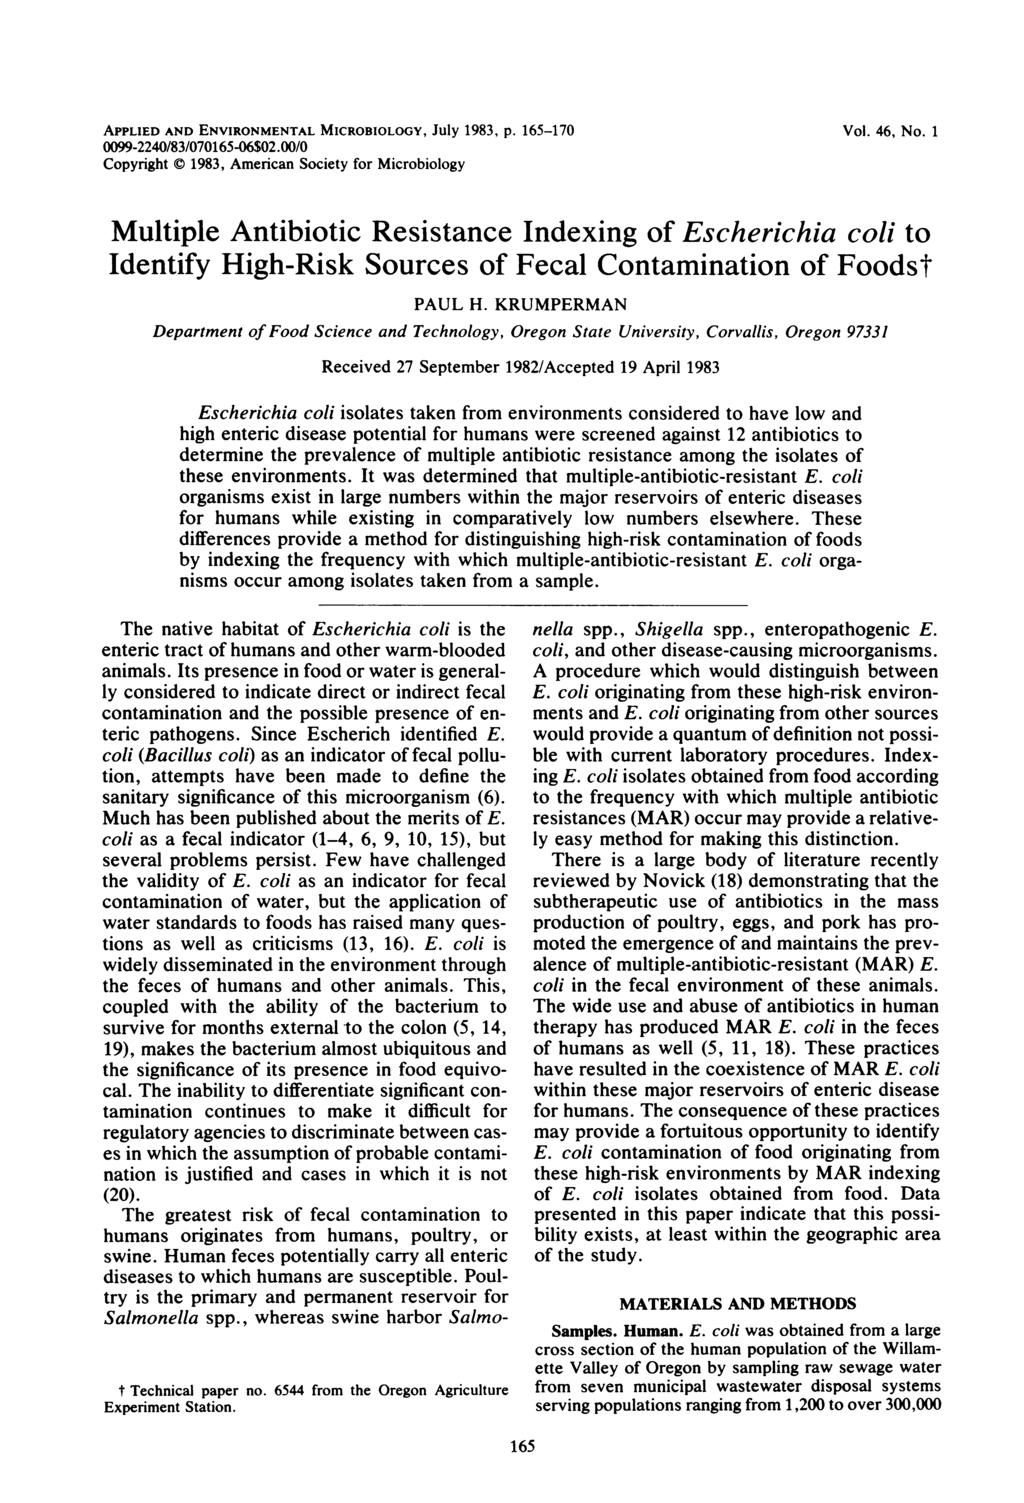 APPLIED AND ENVIRONMENTAL MICROBIOLOGY, July 1983, p. 165-170 0099-2240/83/070165-06$02.00/0 Copyright 1983, American Society for Microbiology Vol. 46, No.